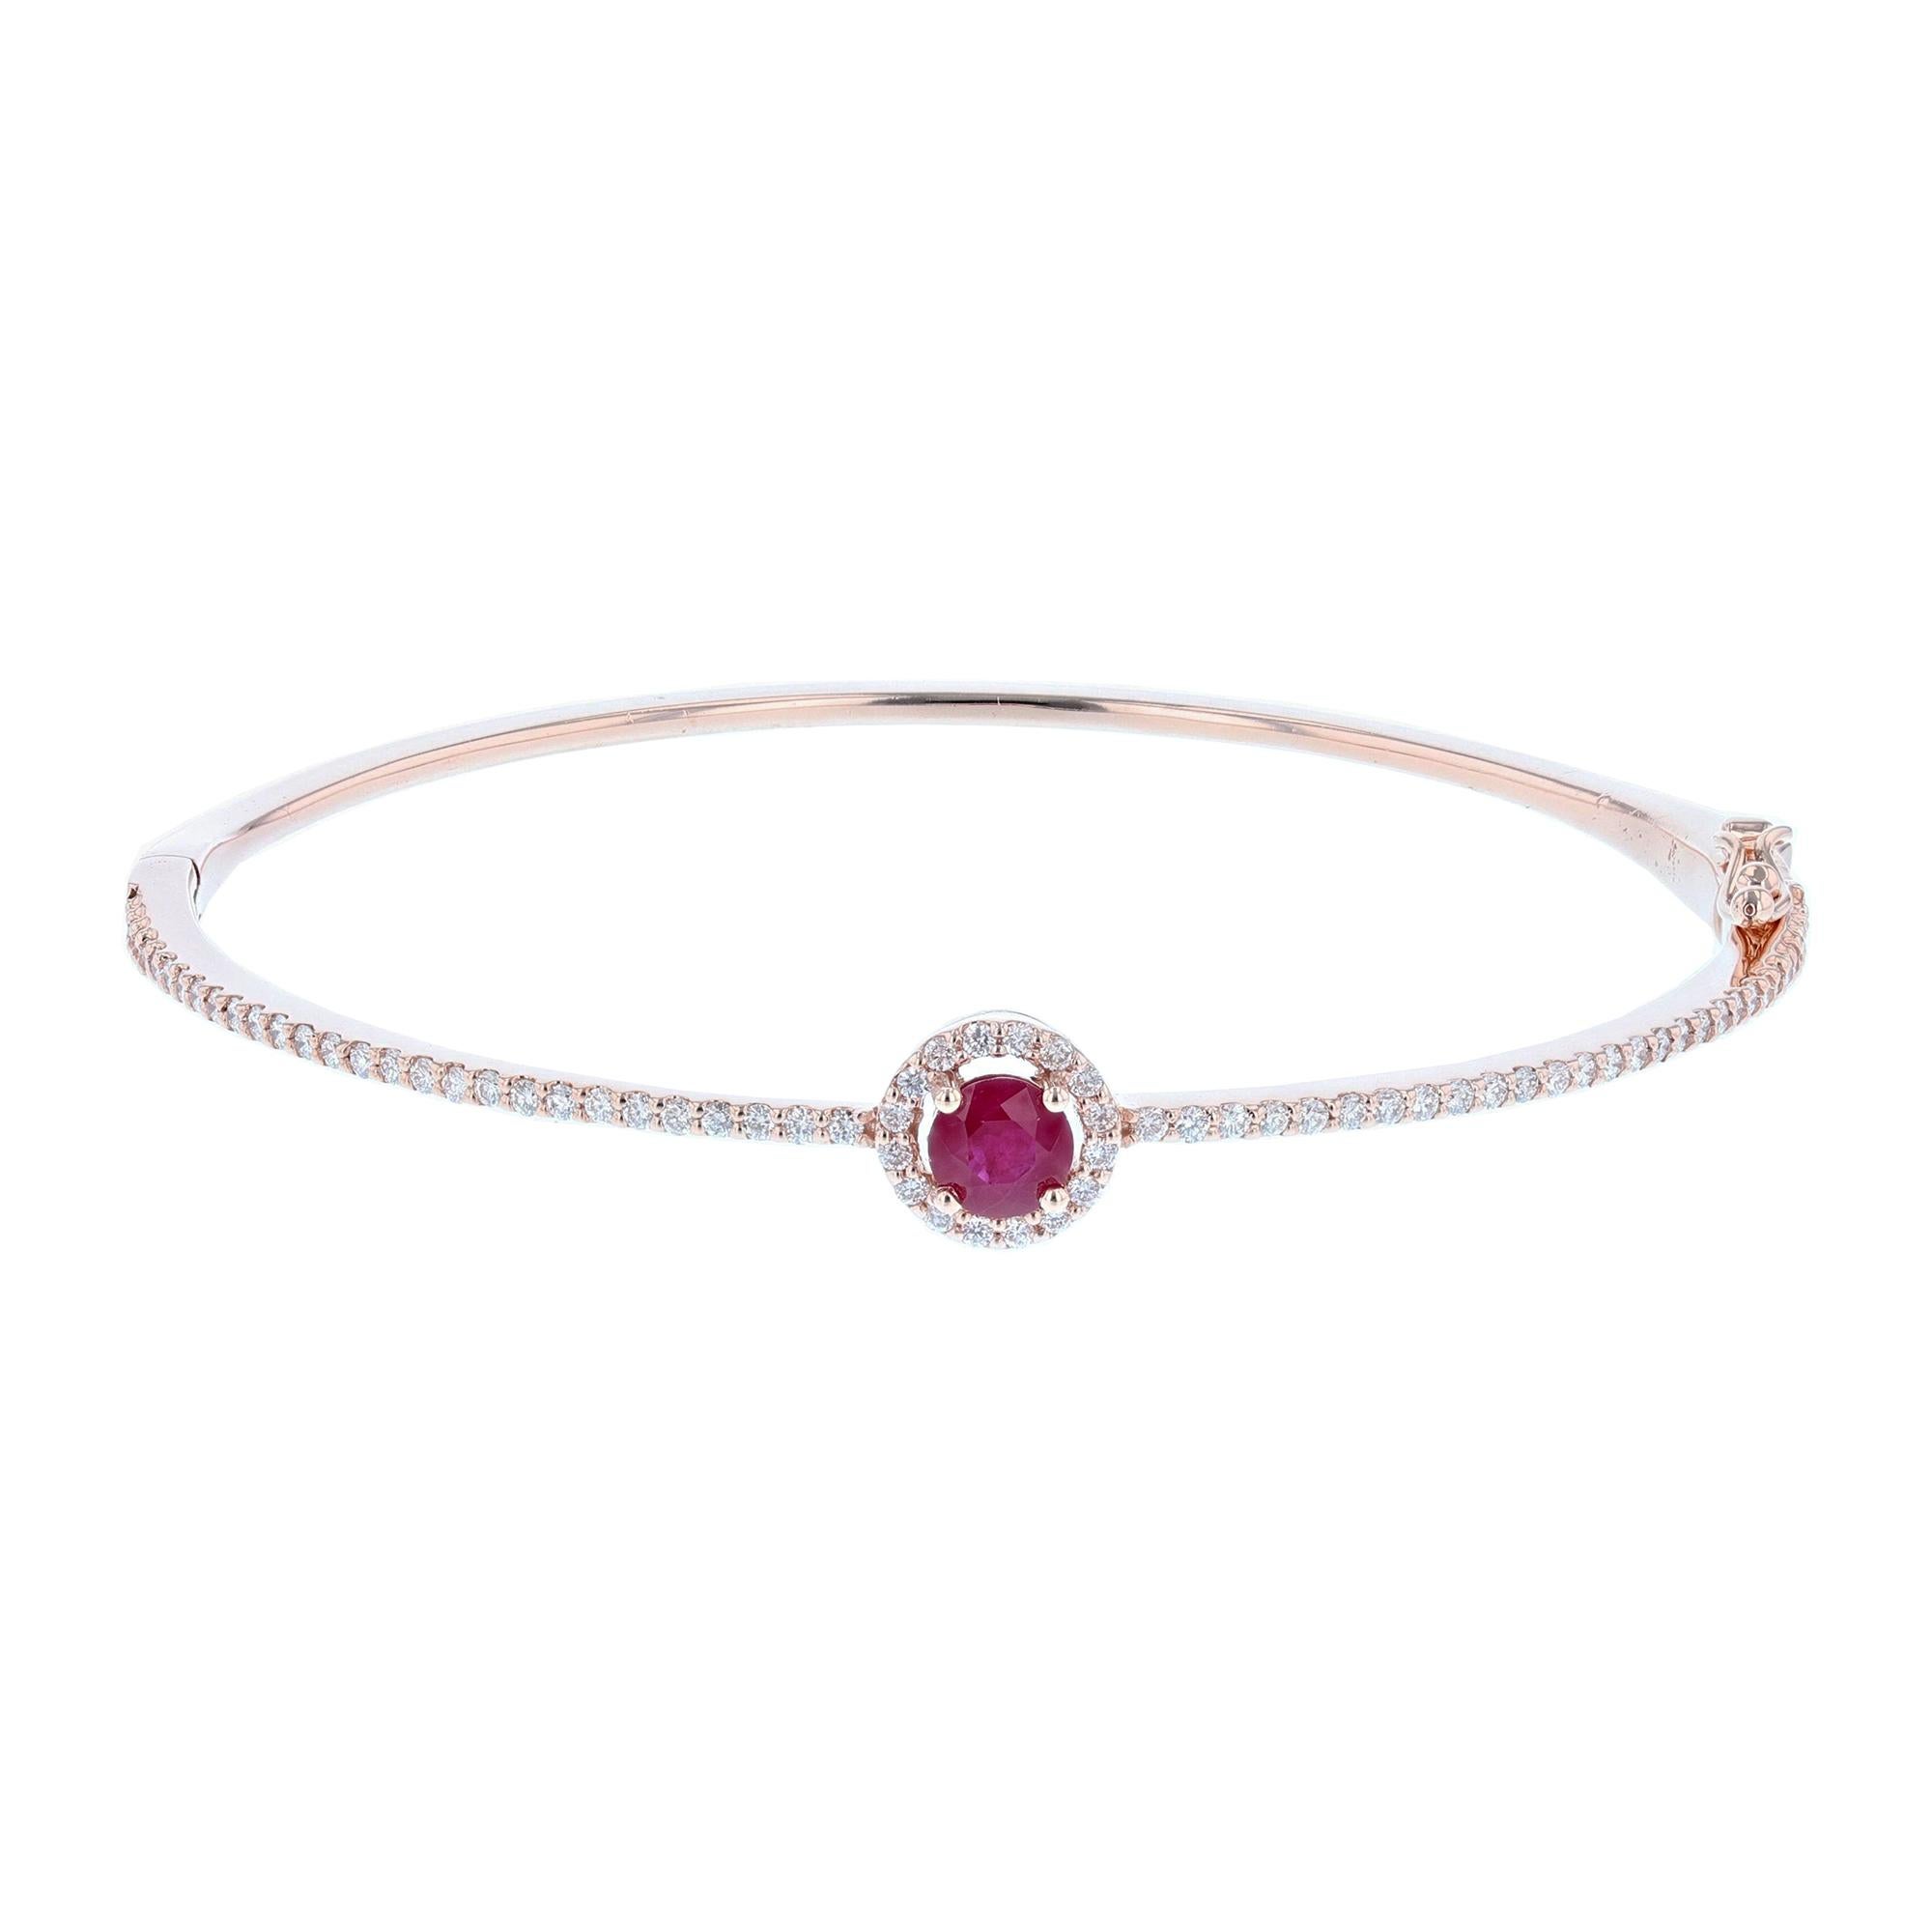 This bangle is made in 14K rose gold and features 1 Round cut, prong set Ruby weighing 0.59 carats and 72 round cut, prong set Diamonds weighing 0.63C with a color grade (H) and clarity grade (SI2).